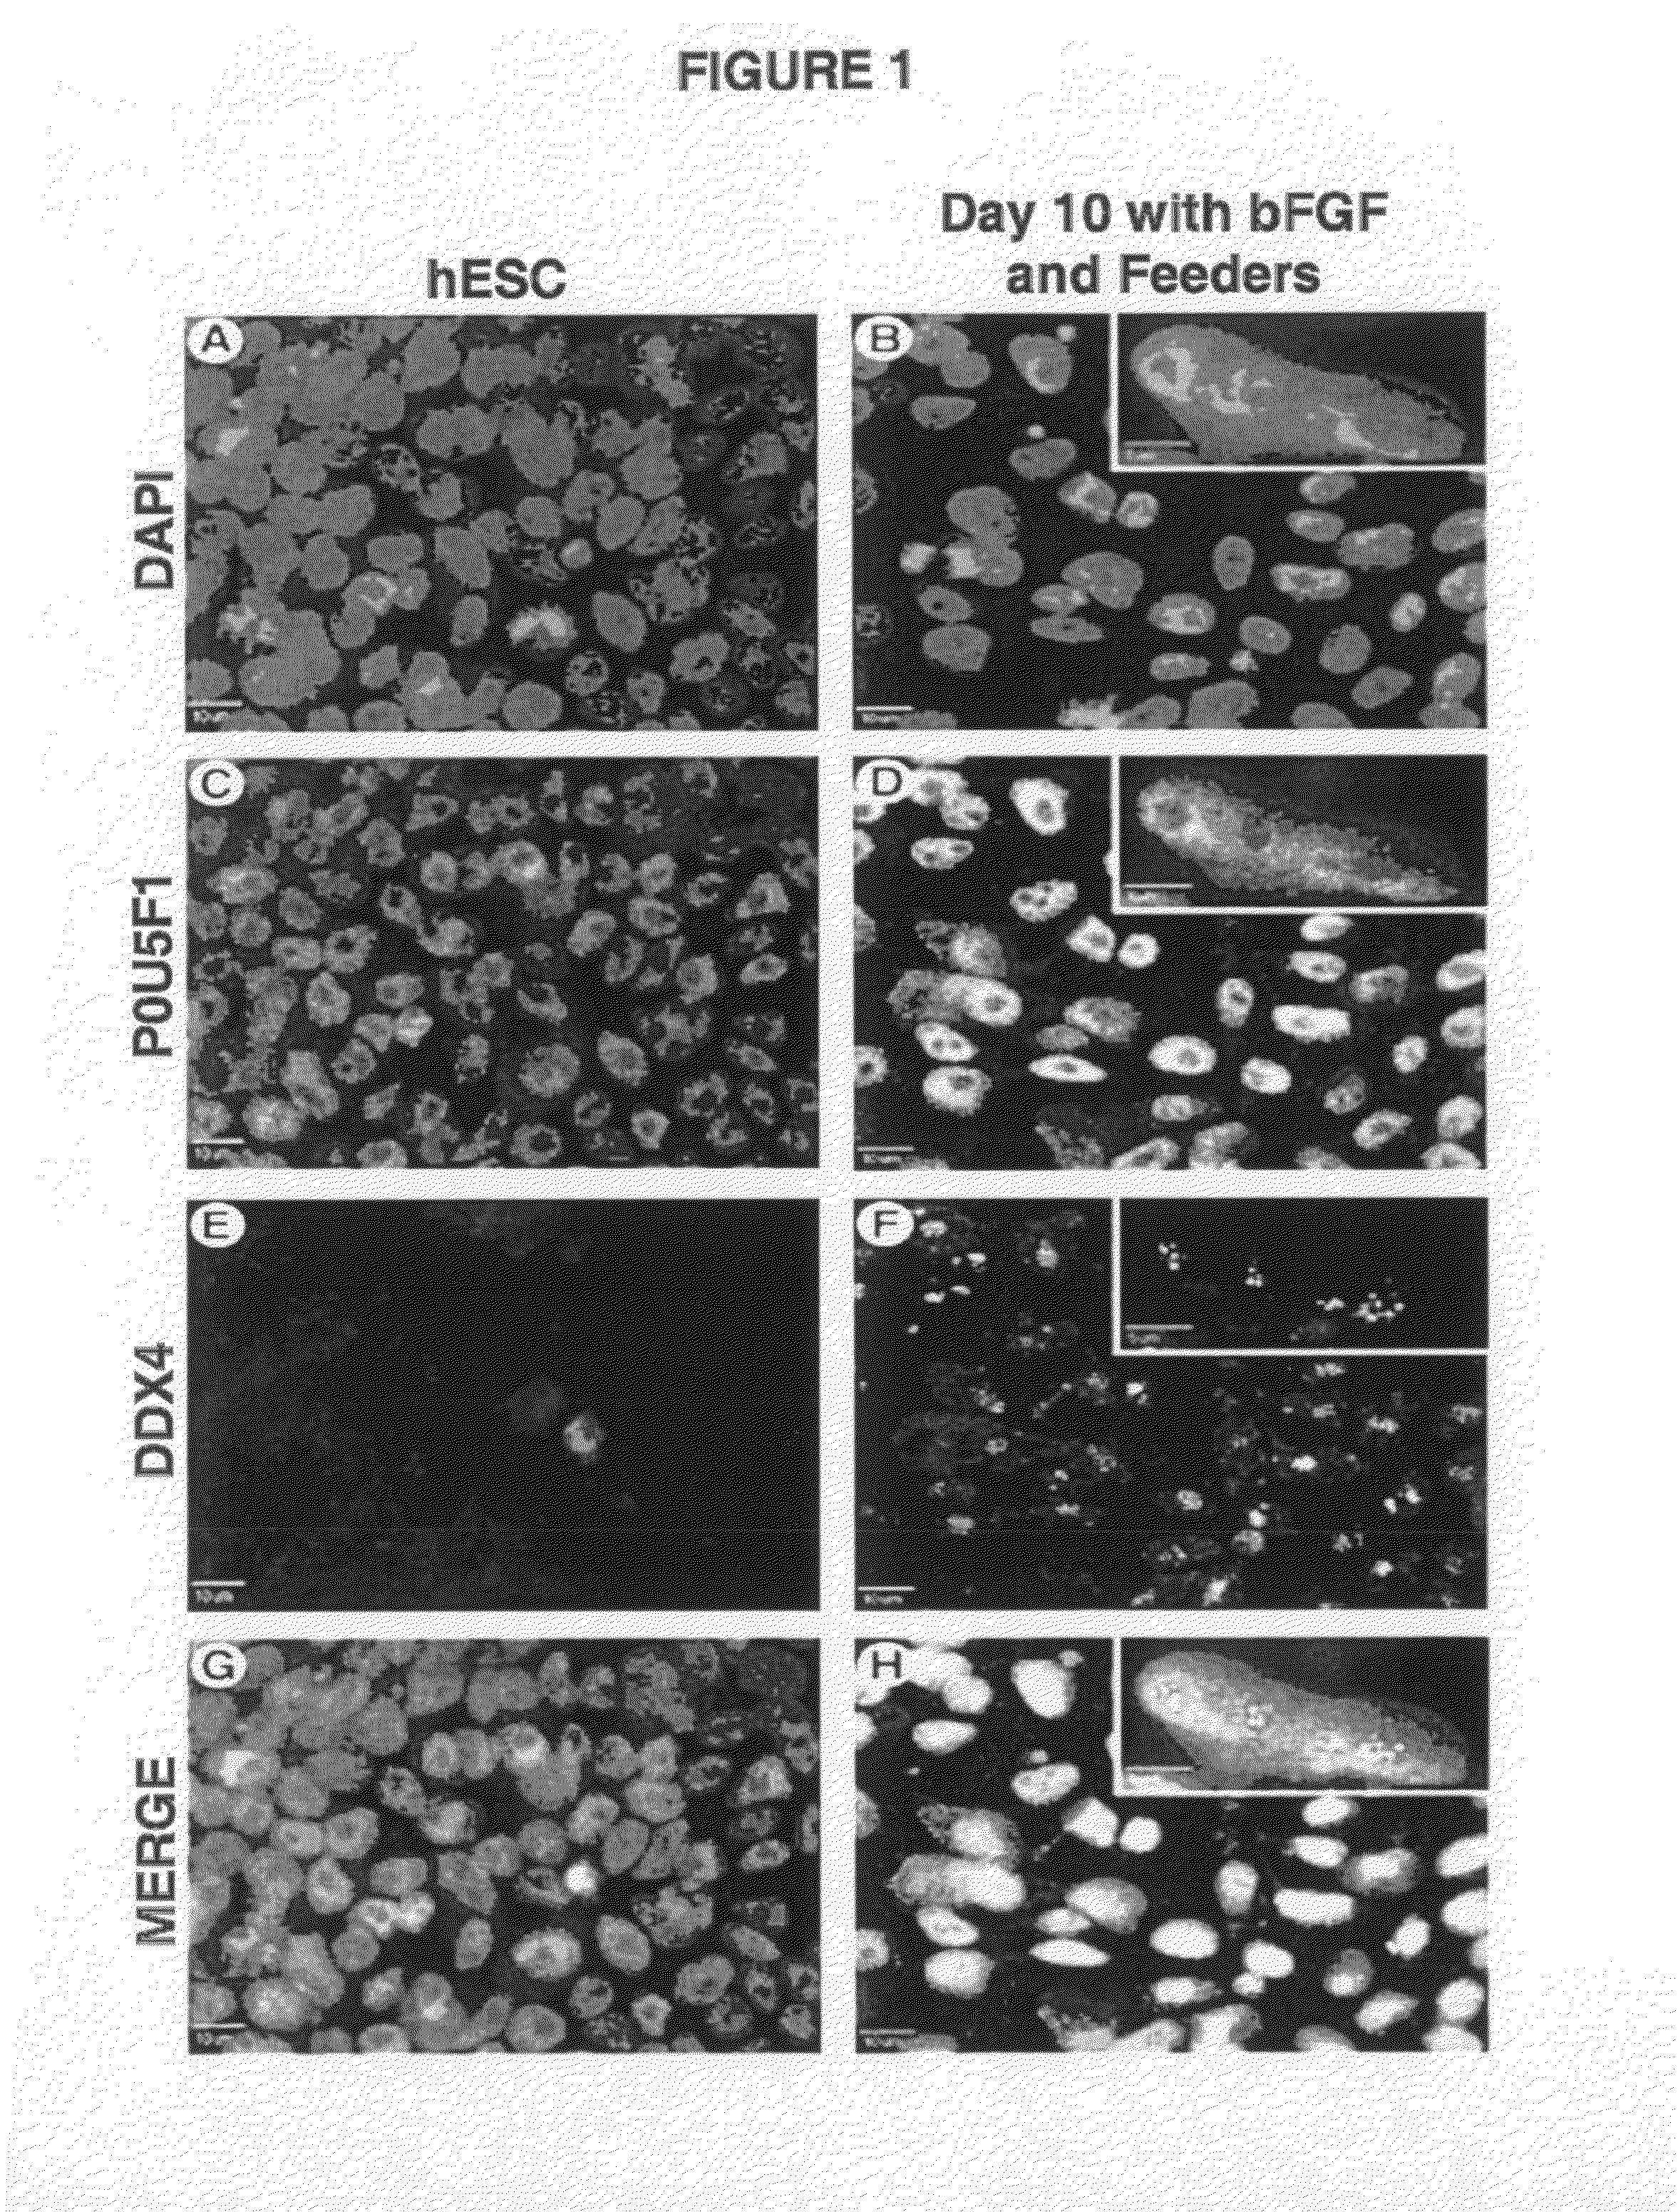 Methods of producing germ-like cells and related therapies